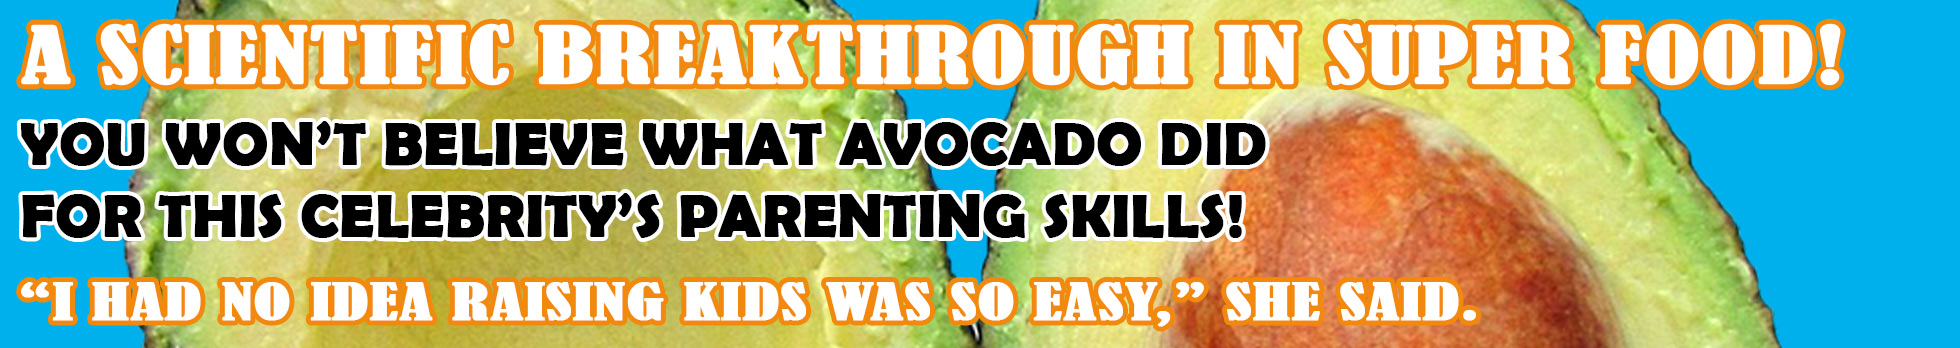 A SCIENTIFIC BREAKTHROUGH IN SUPER FOOD! YOU WON’T BELIEVE WHAT AVOCADO DID FOR THIS CELEBRITY’S PARENTING SKILLS! I HAD NO IDEA RAISING KIDS WAS SO EASY, SHE SAID.